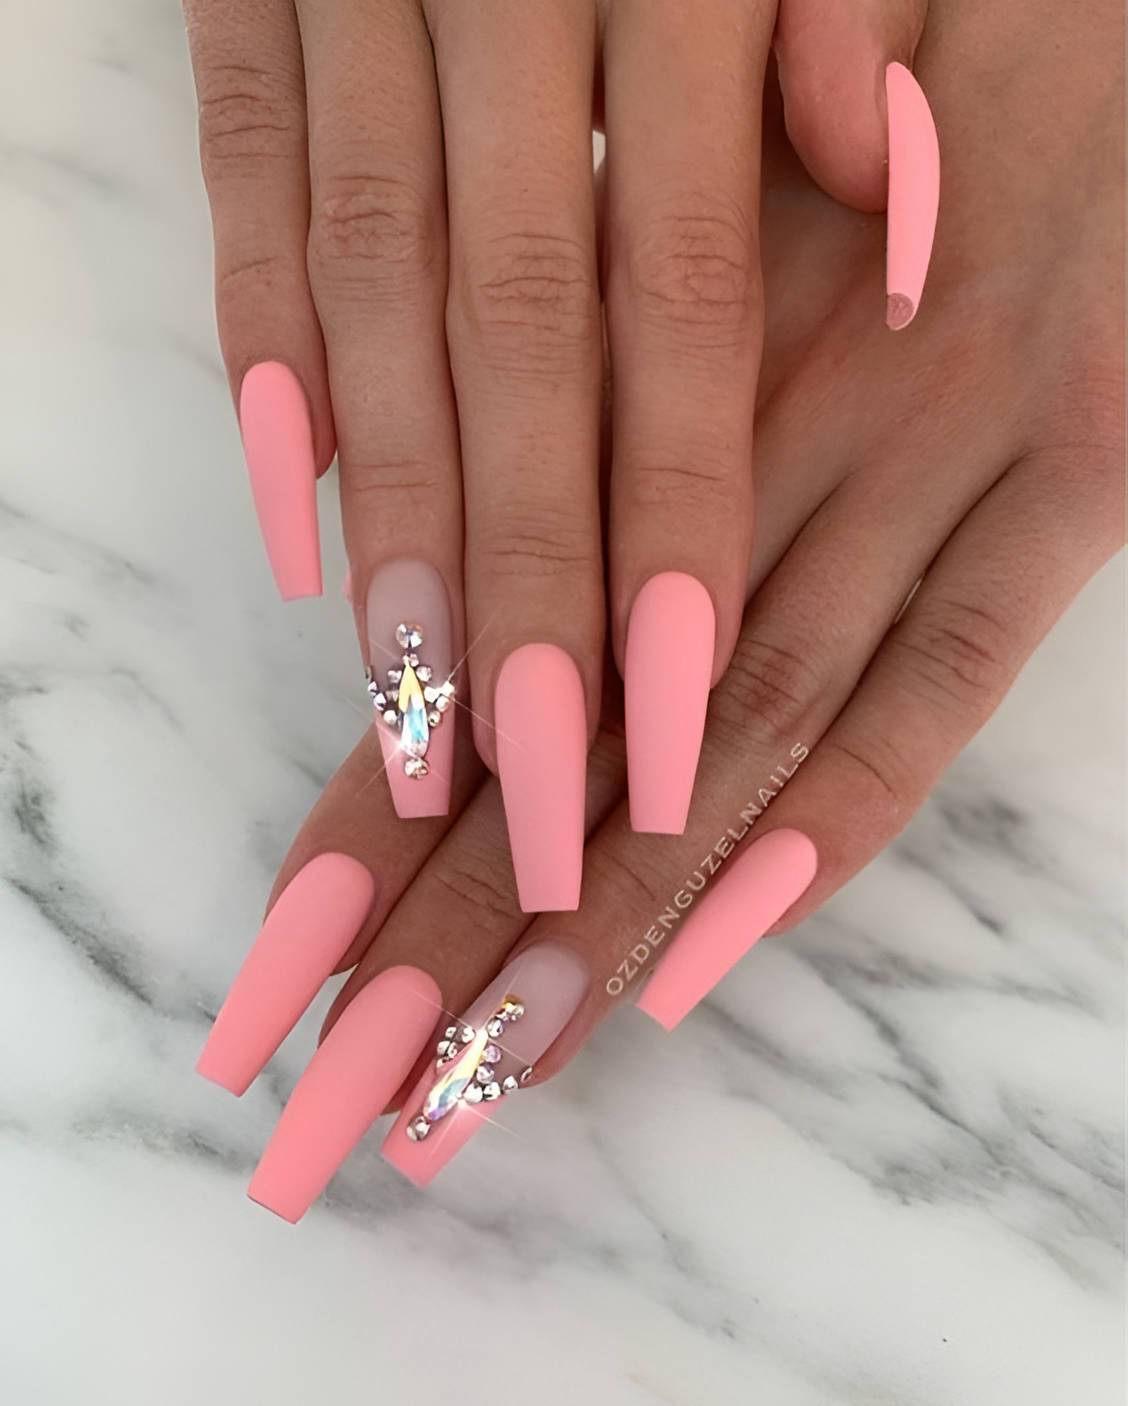 30 Stunning Square Nail Designs To Vamp Up Your Manicure Game - 215